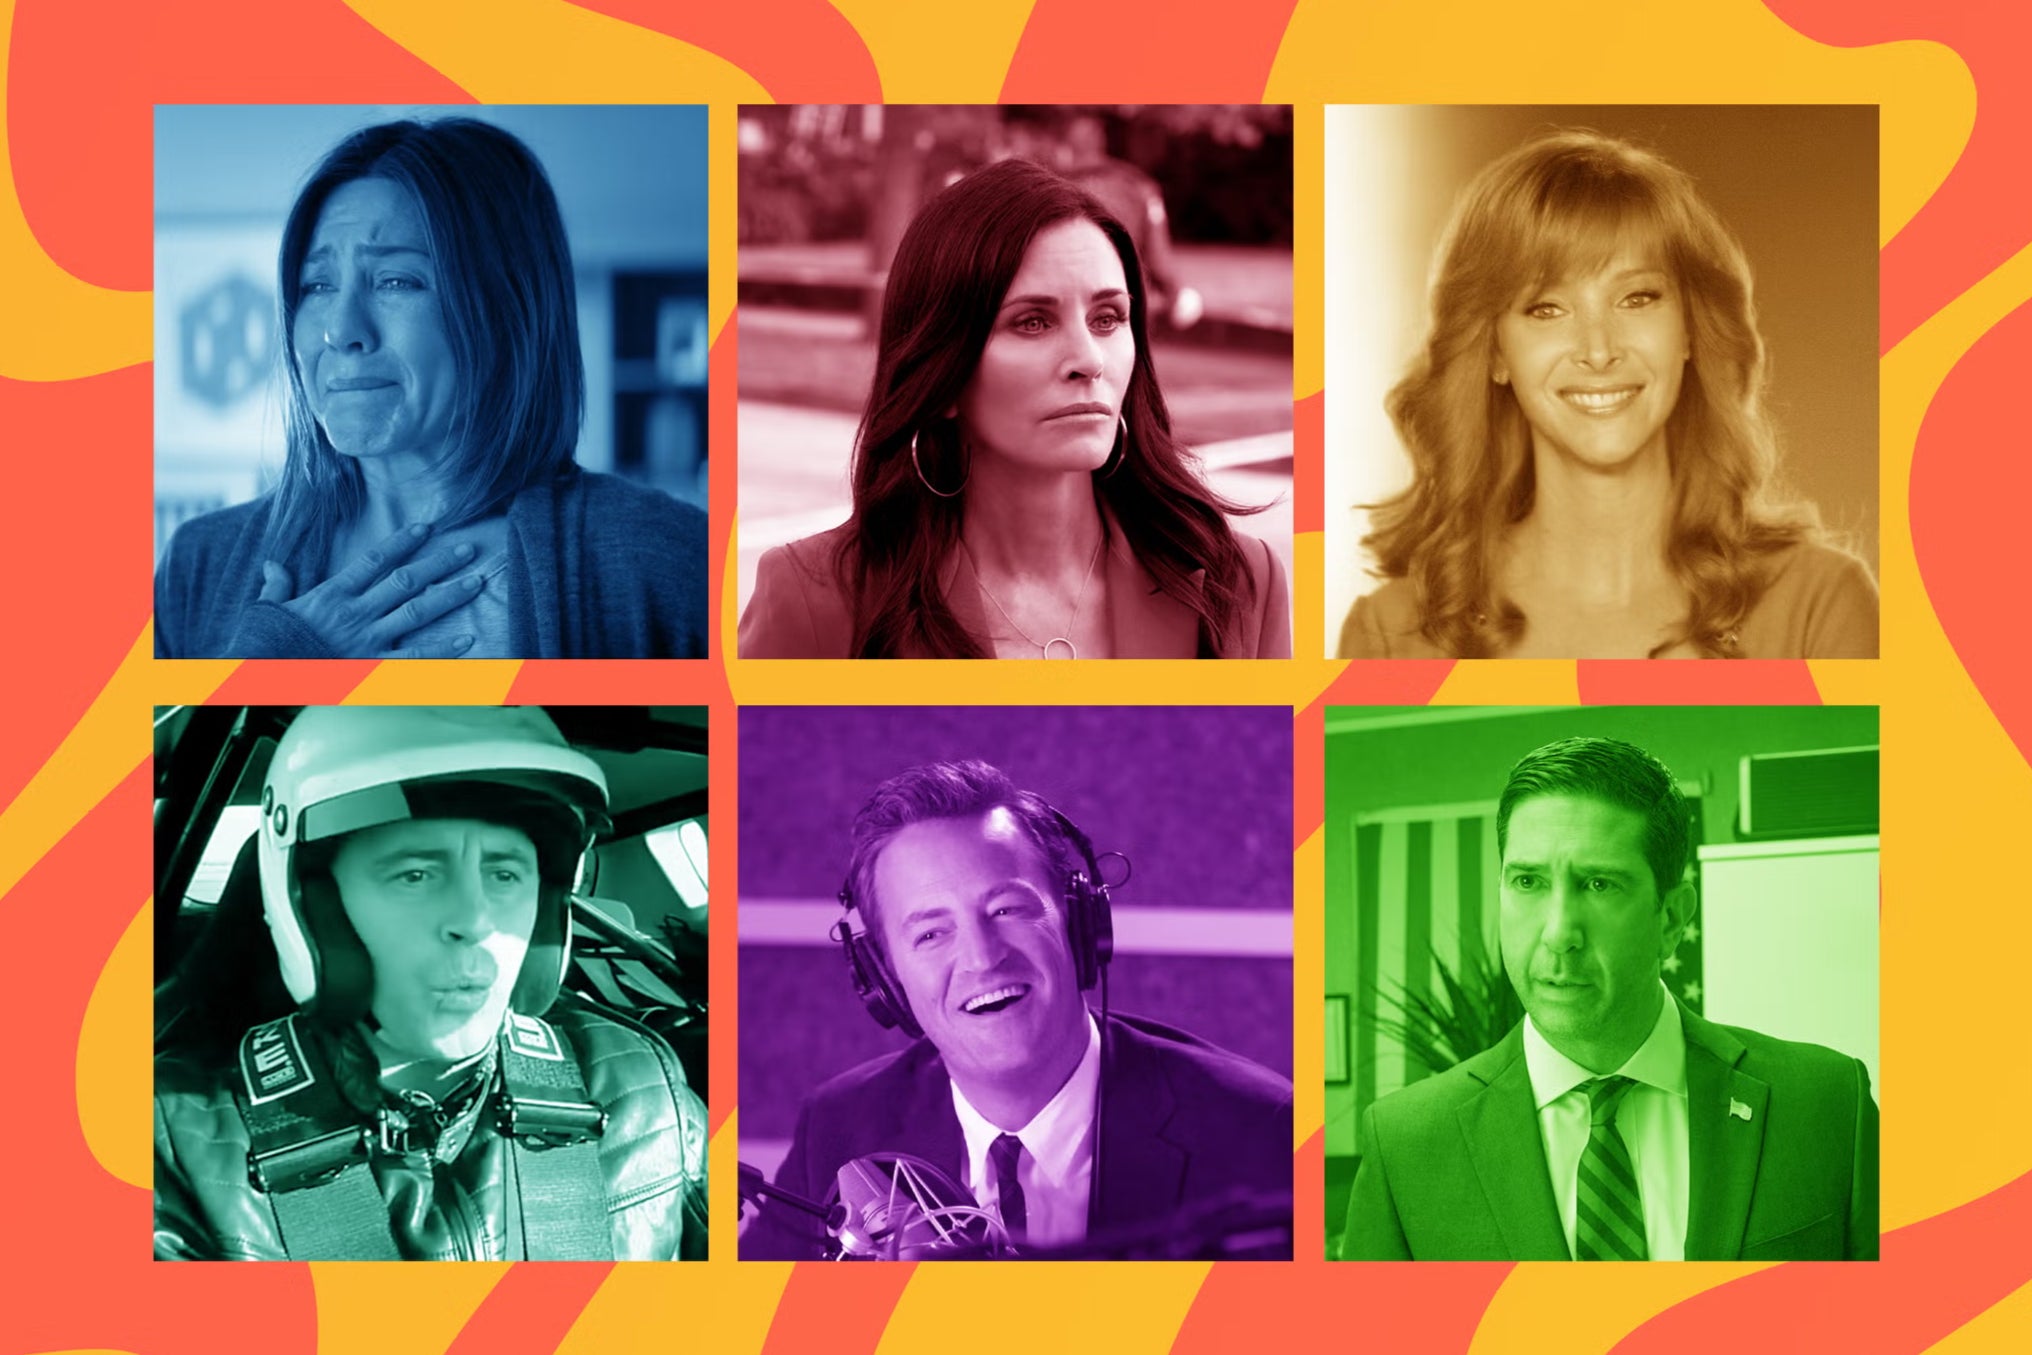 The ‘Friends’ after ‘Friends’: Jennifer Aniston in ‘Cake’, Courteney Cox in ‘Scream’, Lisa Kudrow in ‘The Comeback’, David Schwimmer in ‘Intelligence’, Matthew Perry in ‘Go On’ and Matt LeBlanc in ‘Top Gear’